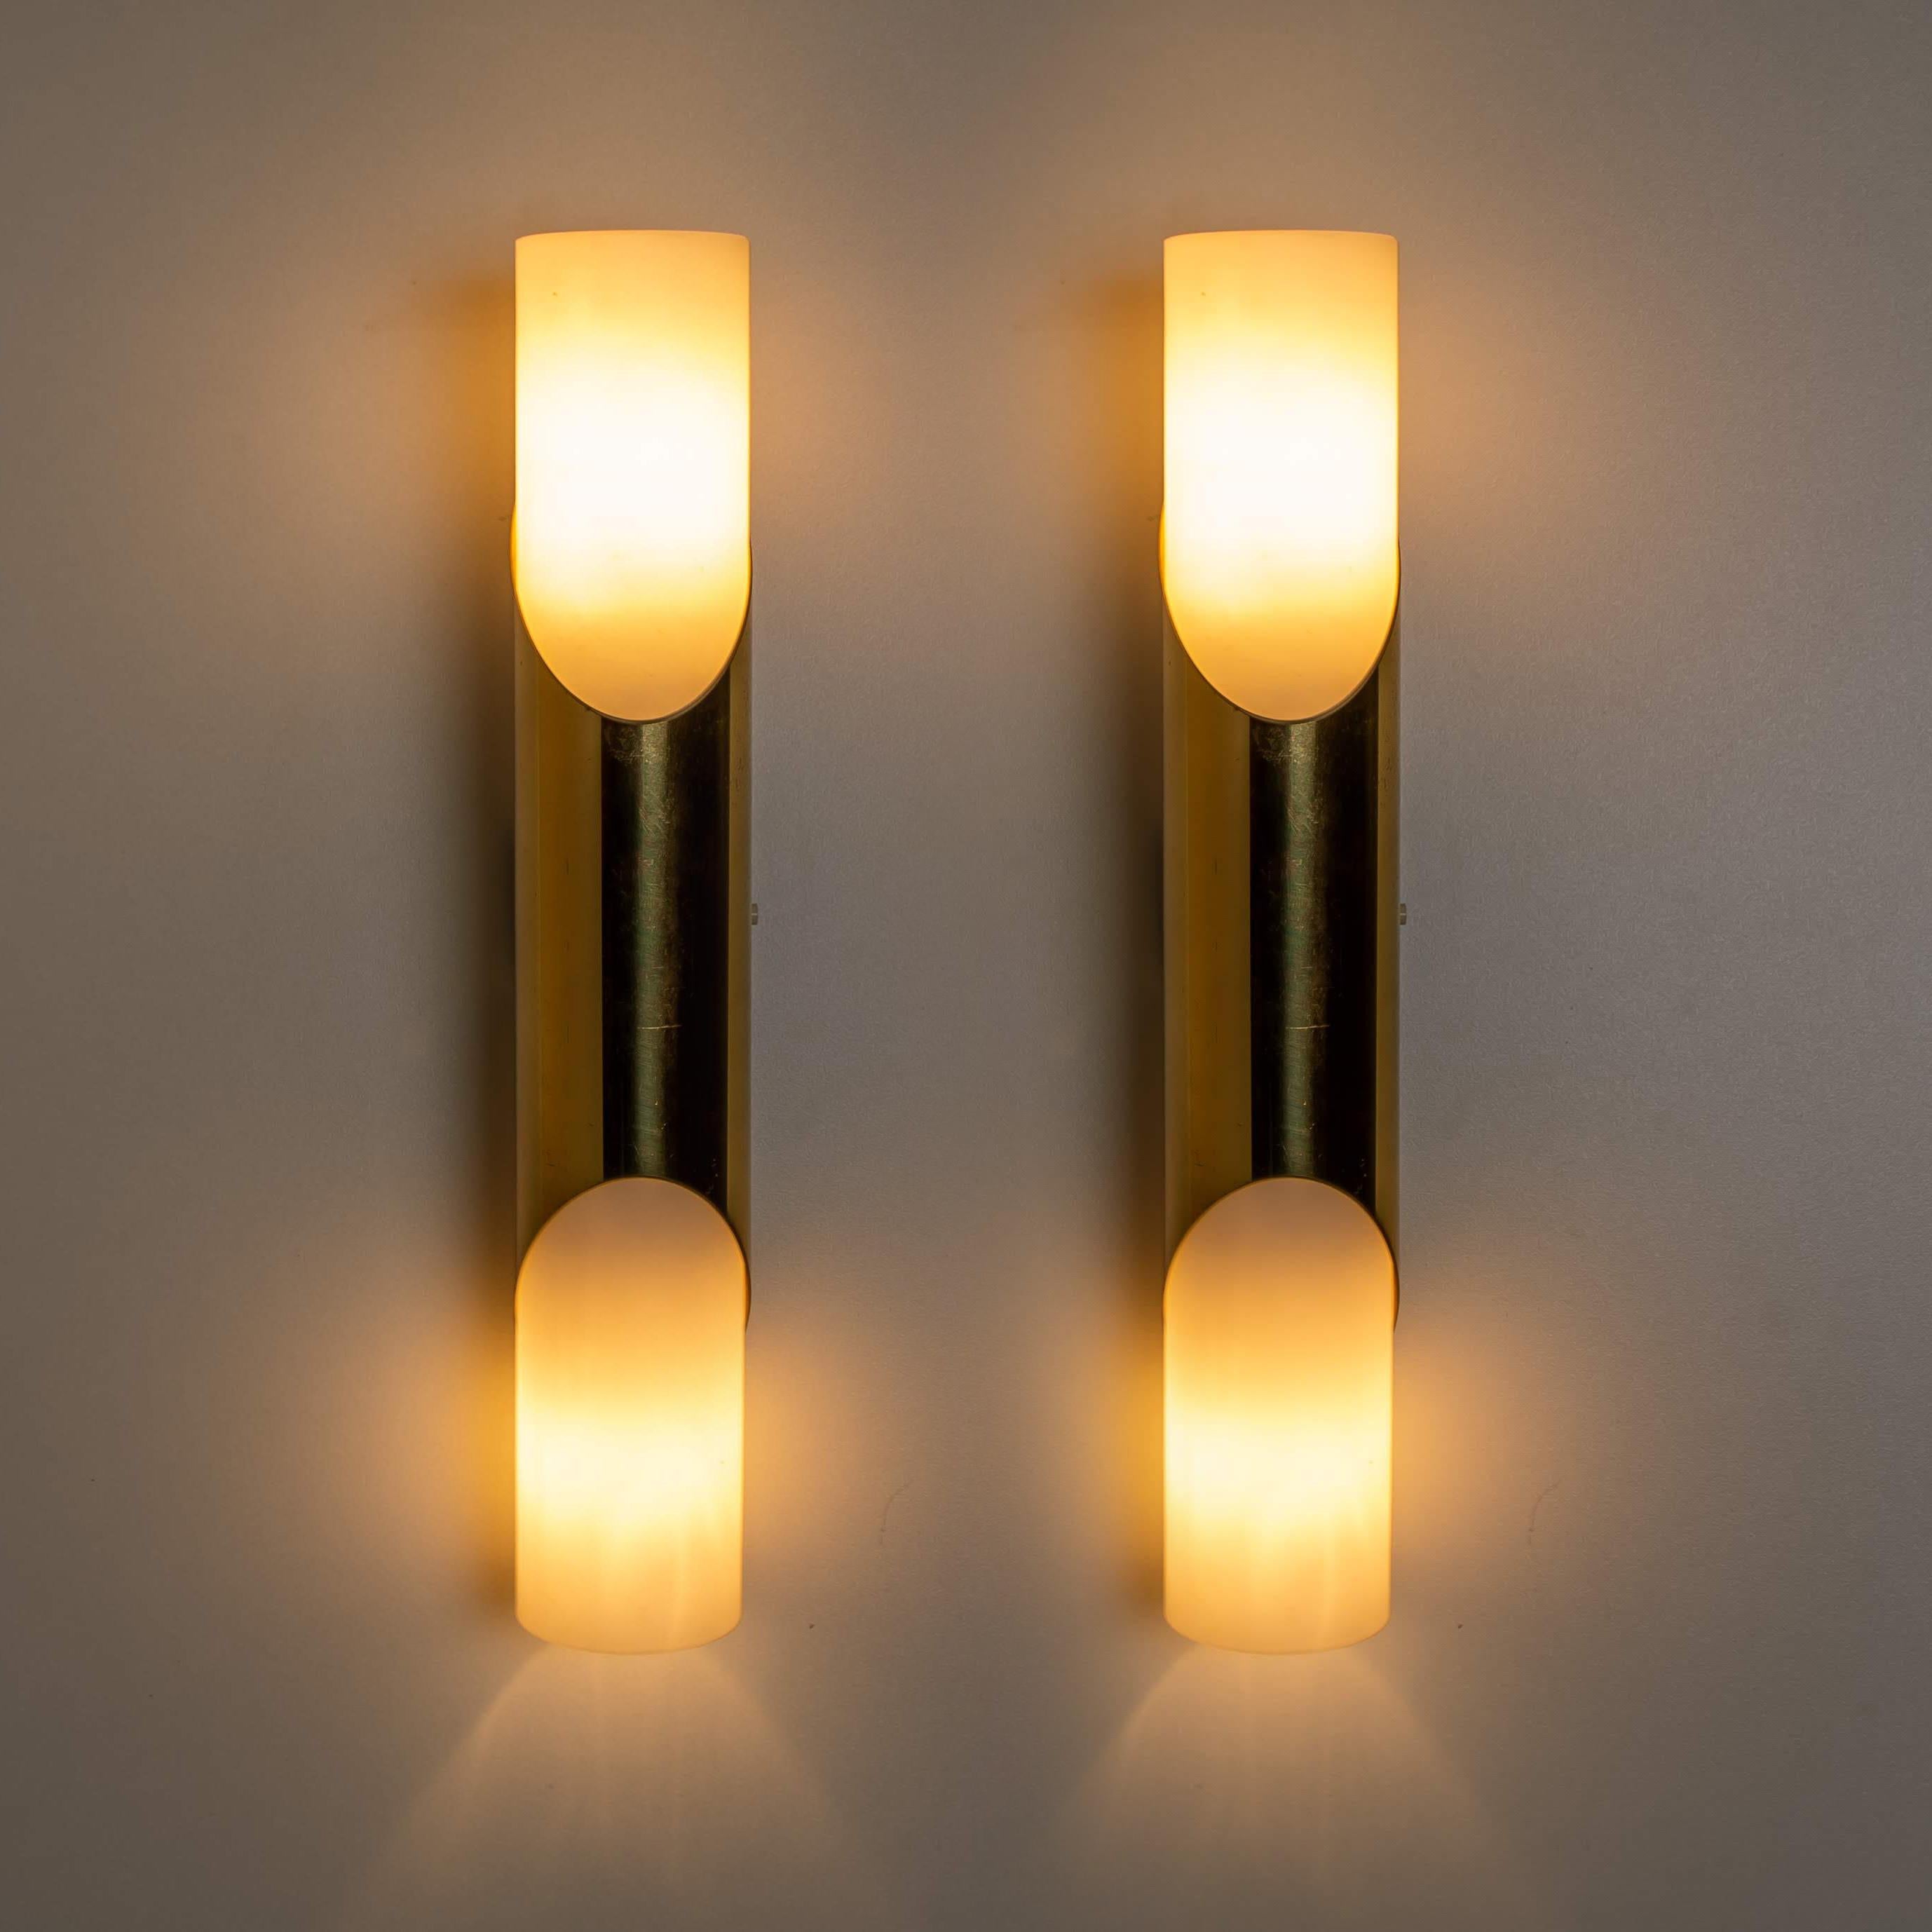 Mid-Century Modern Pair of Wall Sconces or Wall Lights in the Style of RAAK Amsterdam, 1970